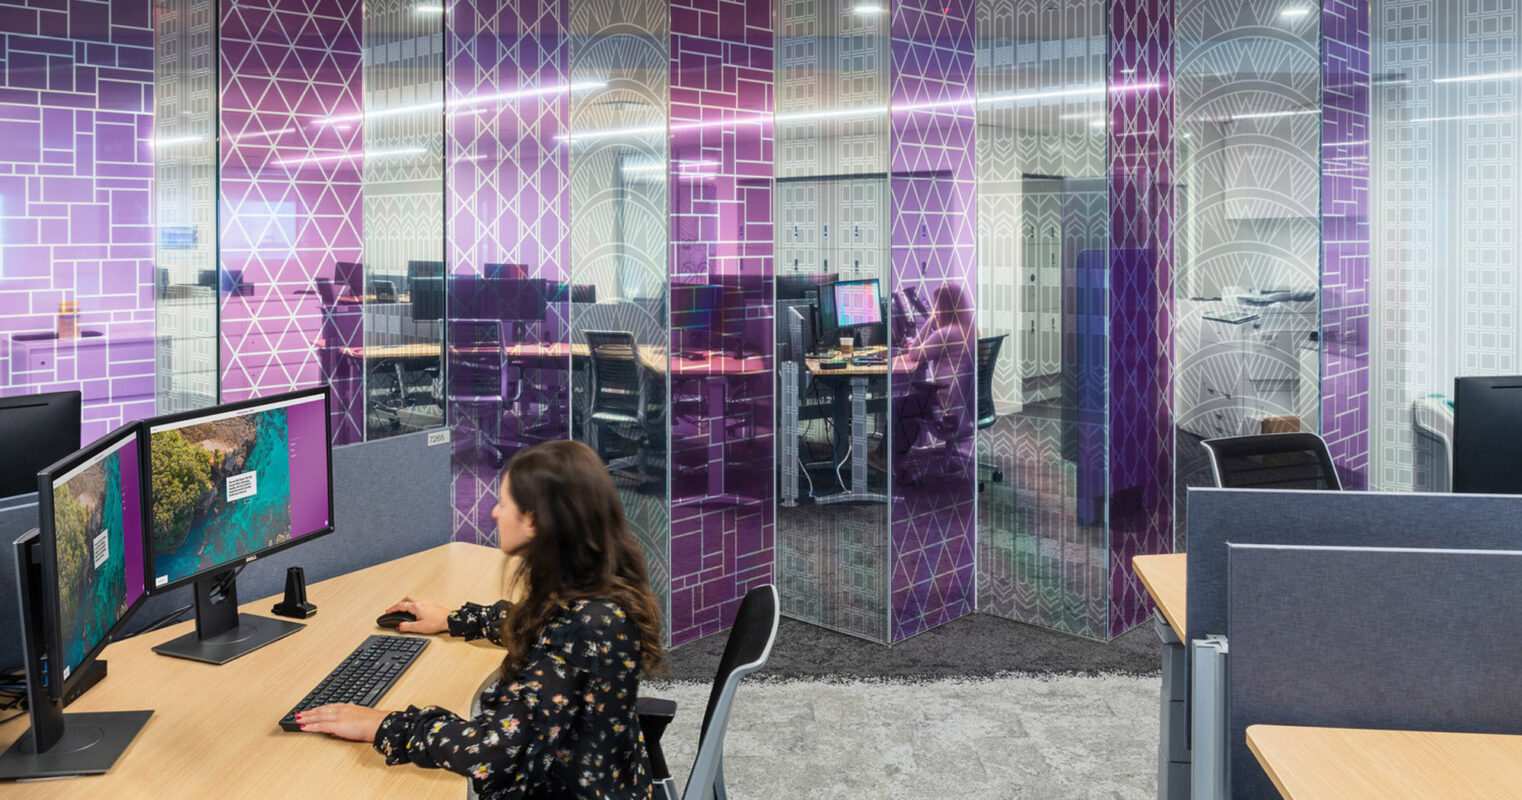 Modern office interior featuring ergonomic workstations with dual monitors, accented by geometric-patterned glass partitions in purple tones, providing both privacy and a visually stimulating environment for productivity.